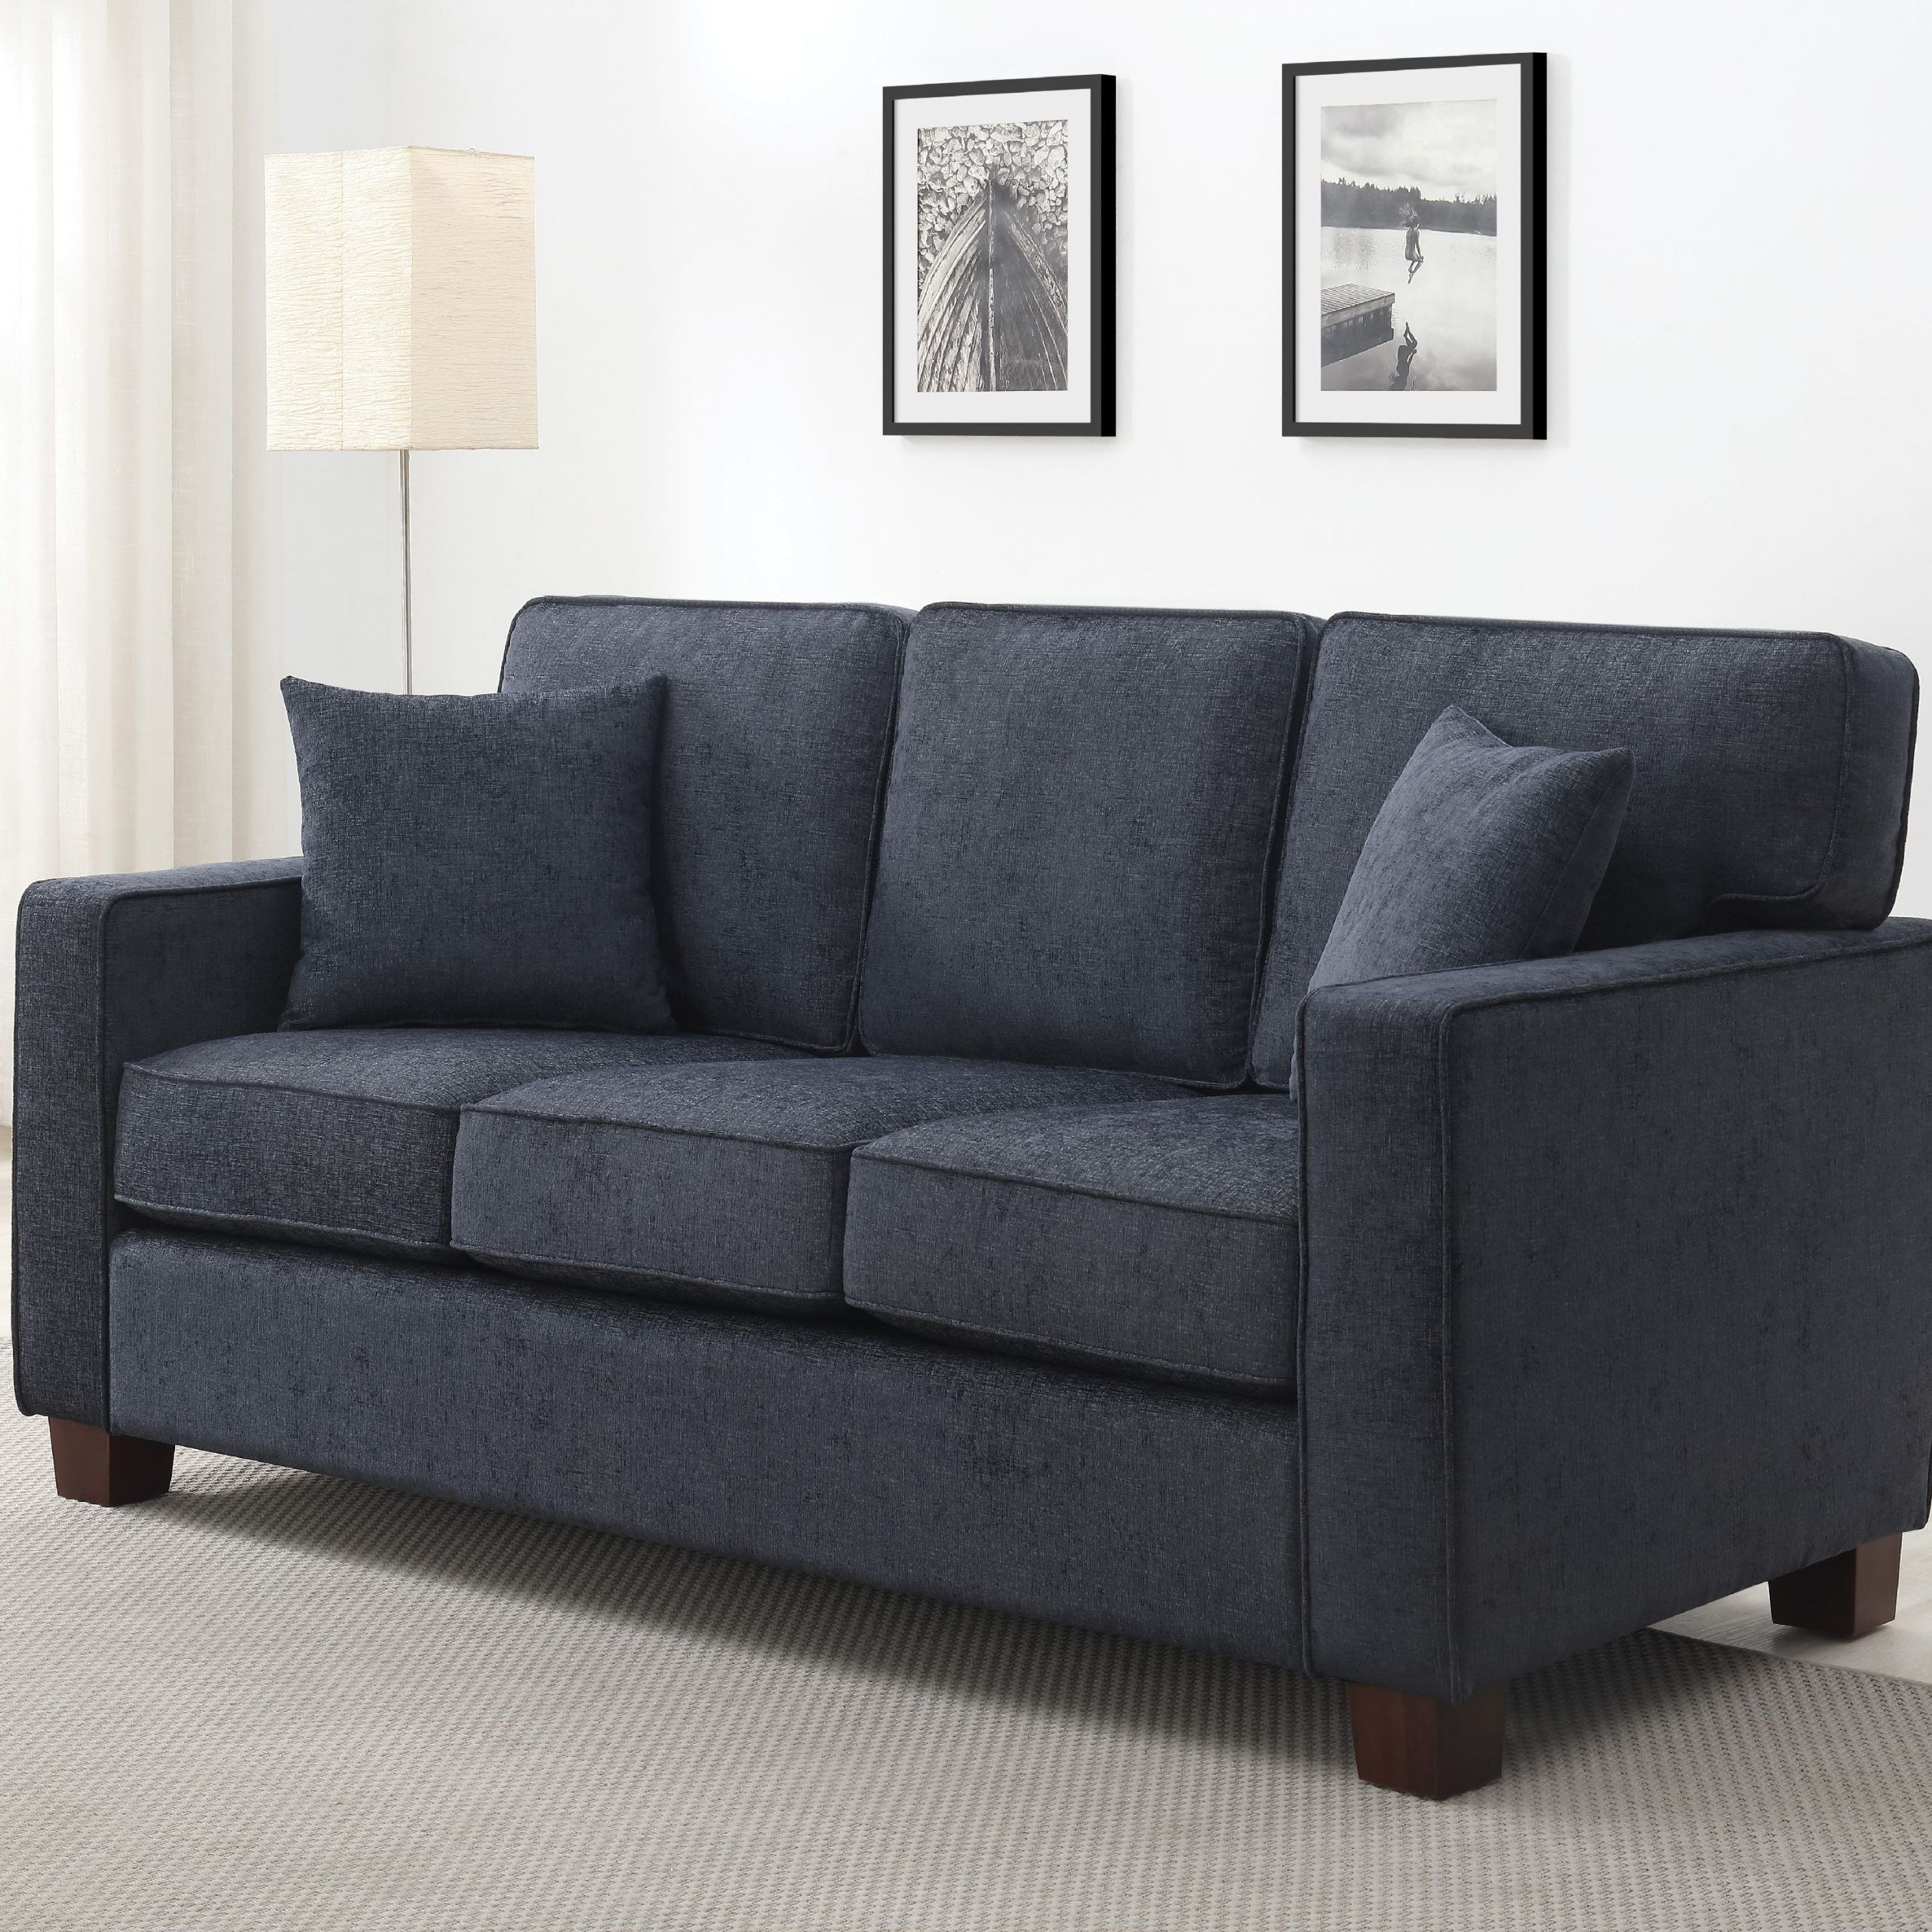 Current Osp Home Furnishings Russell 3 Seater Sofa In Navy Fabric 3/ctn Throughout Navy Sleeper Sofa Couches (View 10 of 15)